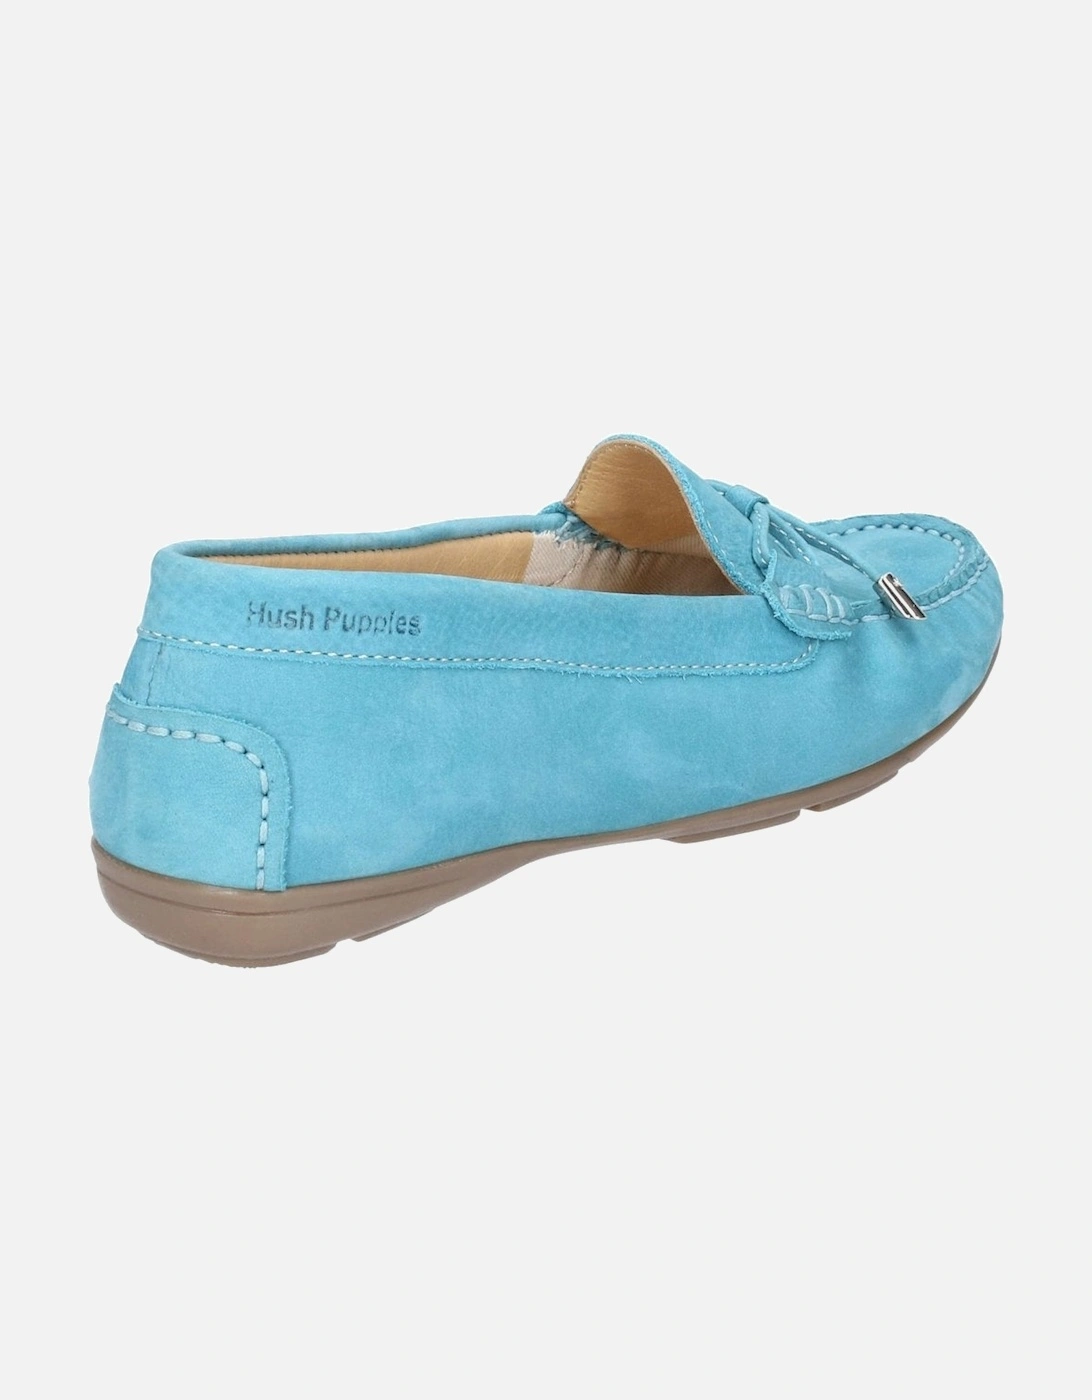 Maggie Womens Moccasin Shoes